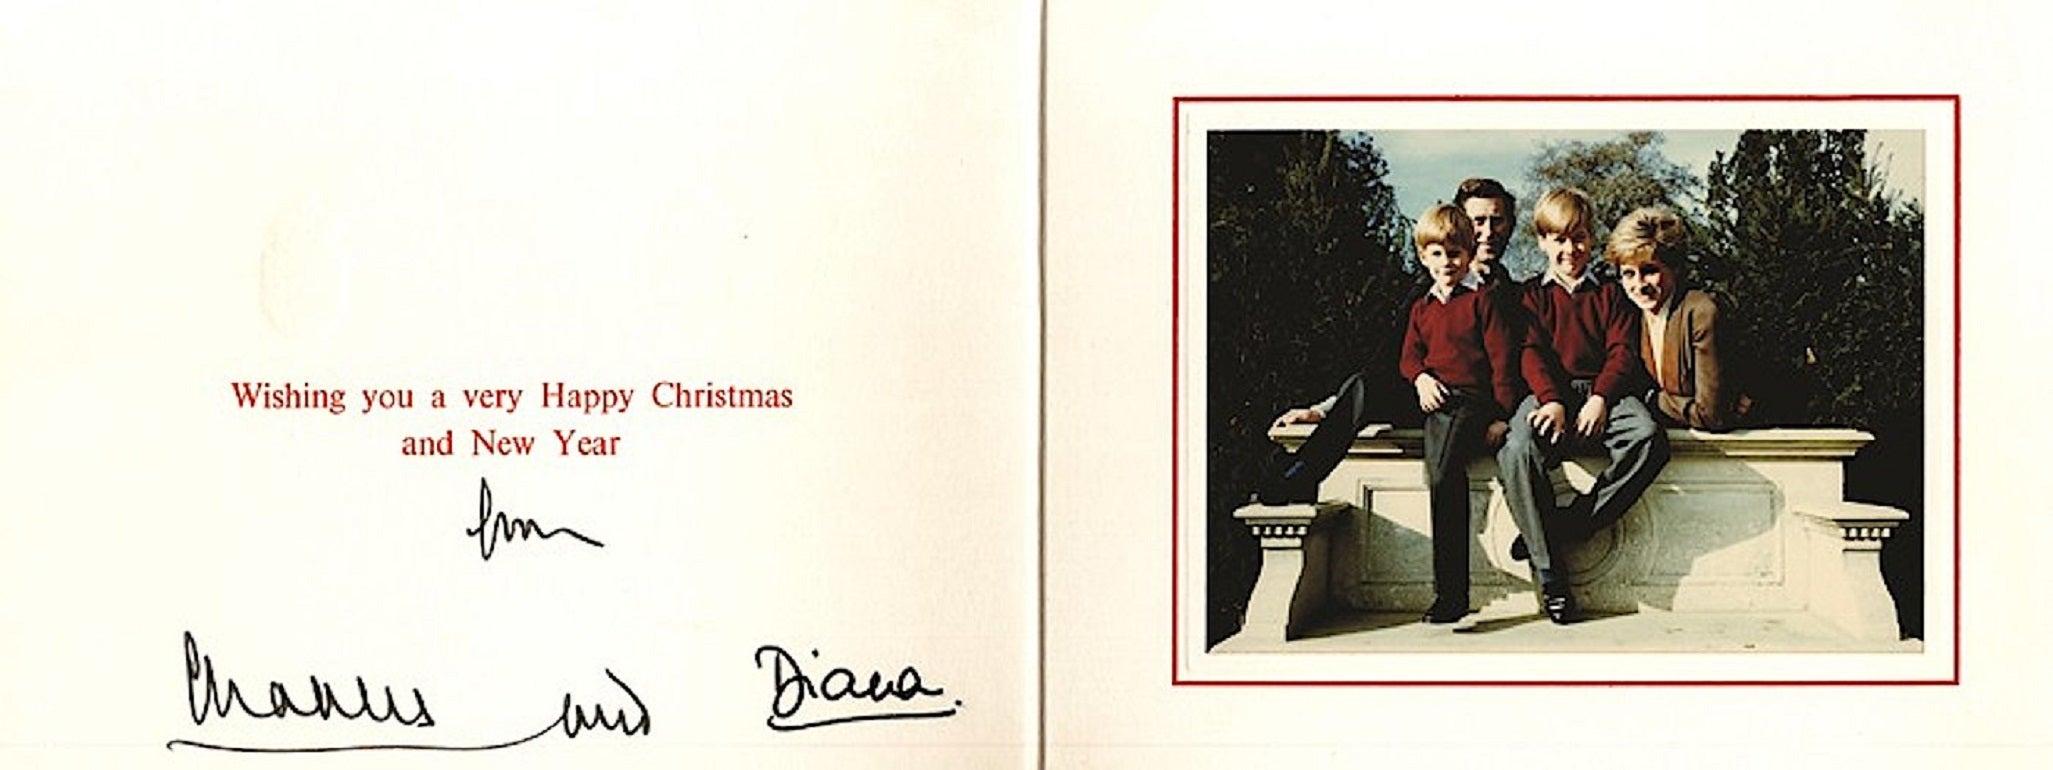 charles and diana christmas cards